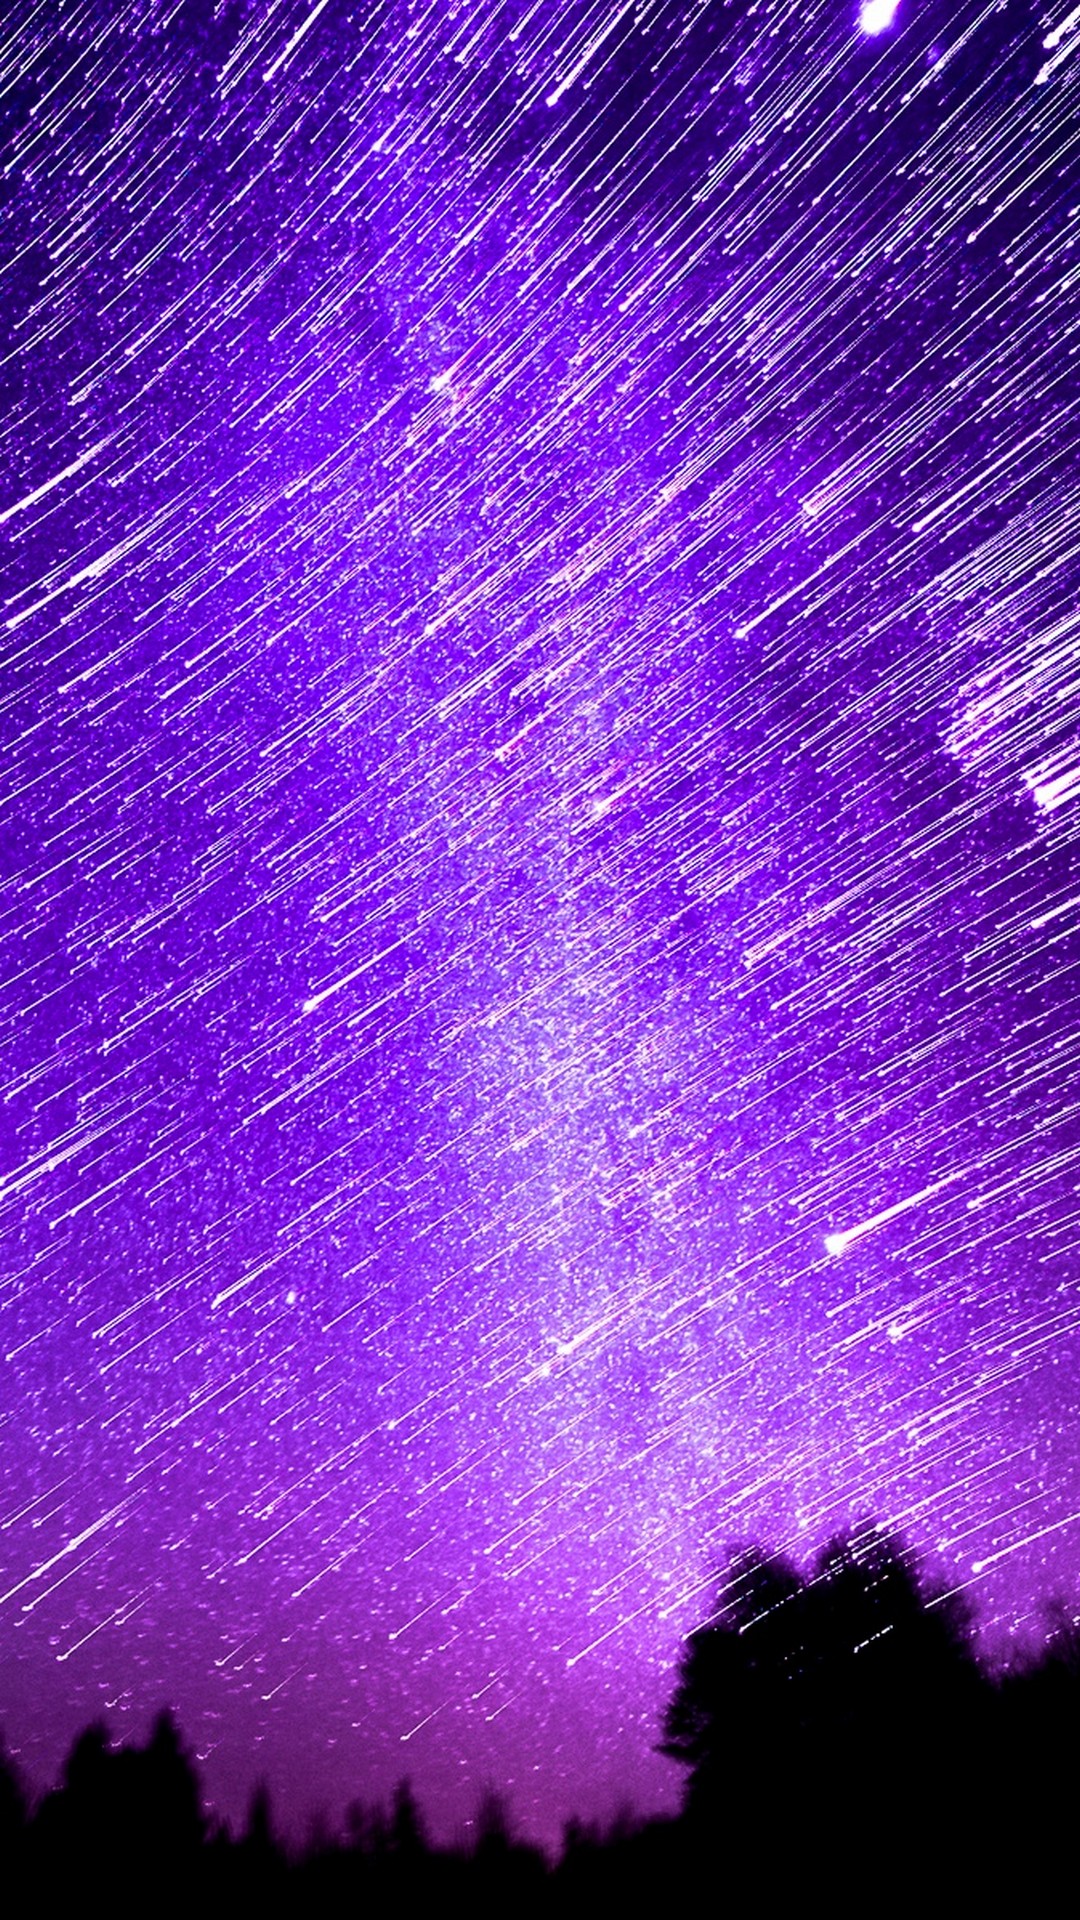 Purple Sky For iPhone Wallpaper resolution 1080x1920